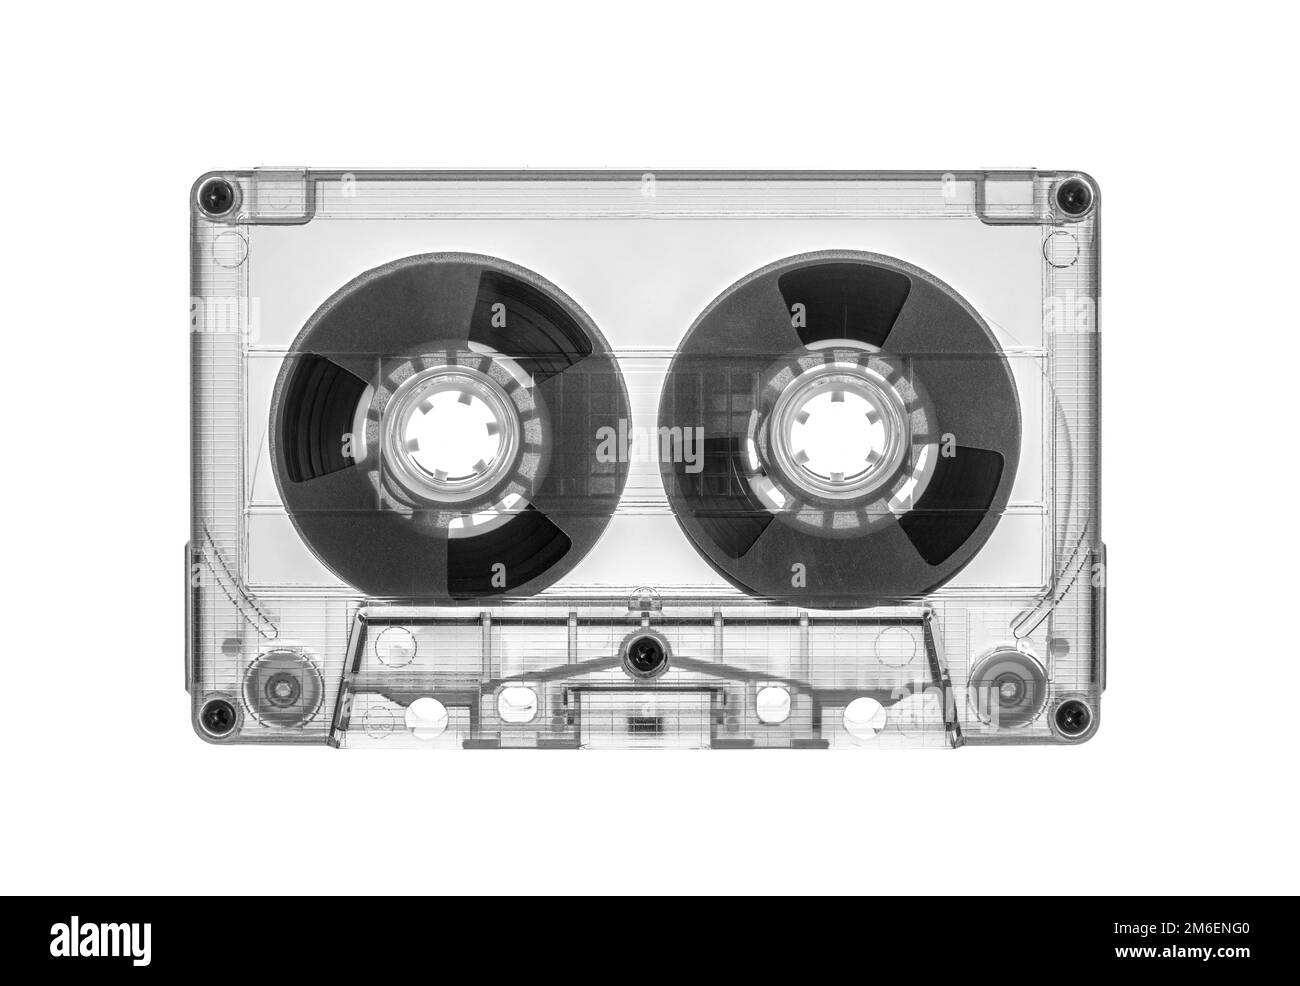 reel 2 reel cassette isolated on white background Stock Photo - Alamy